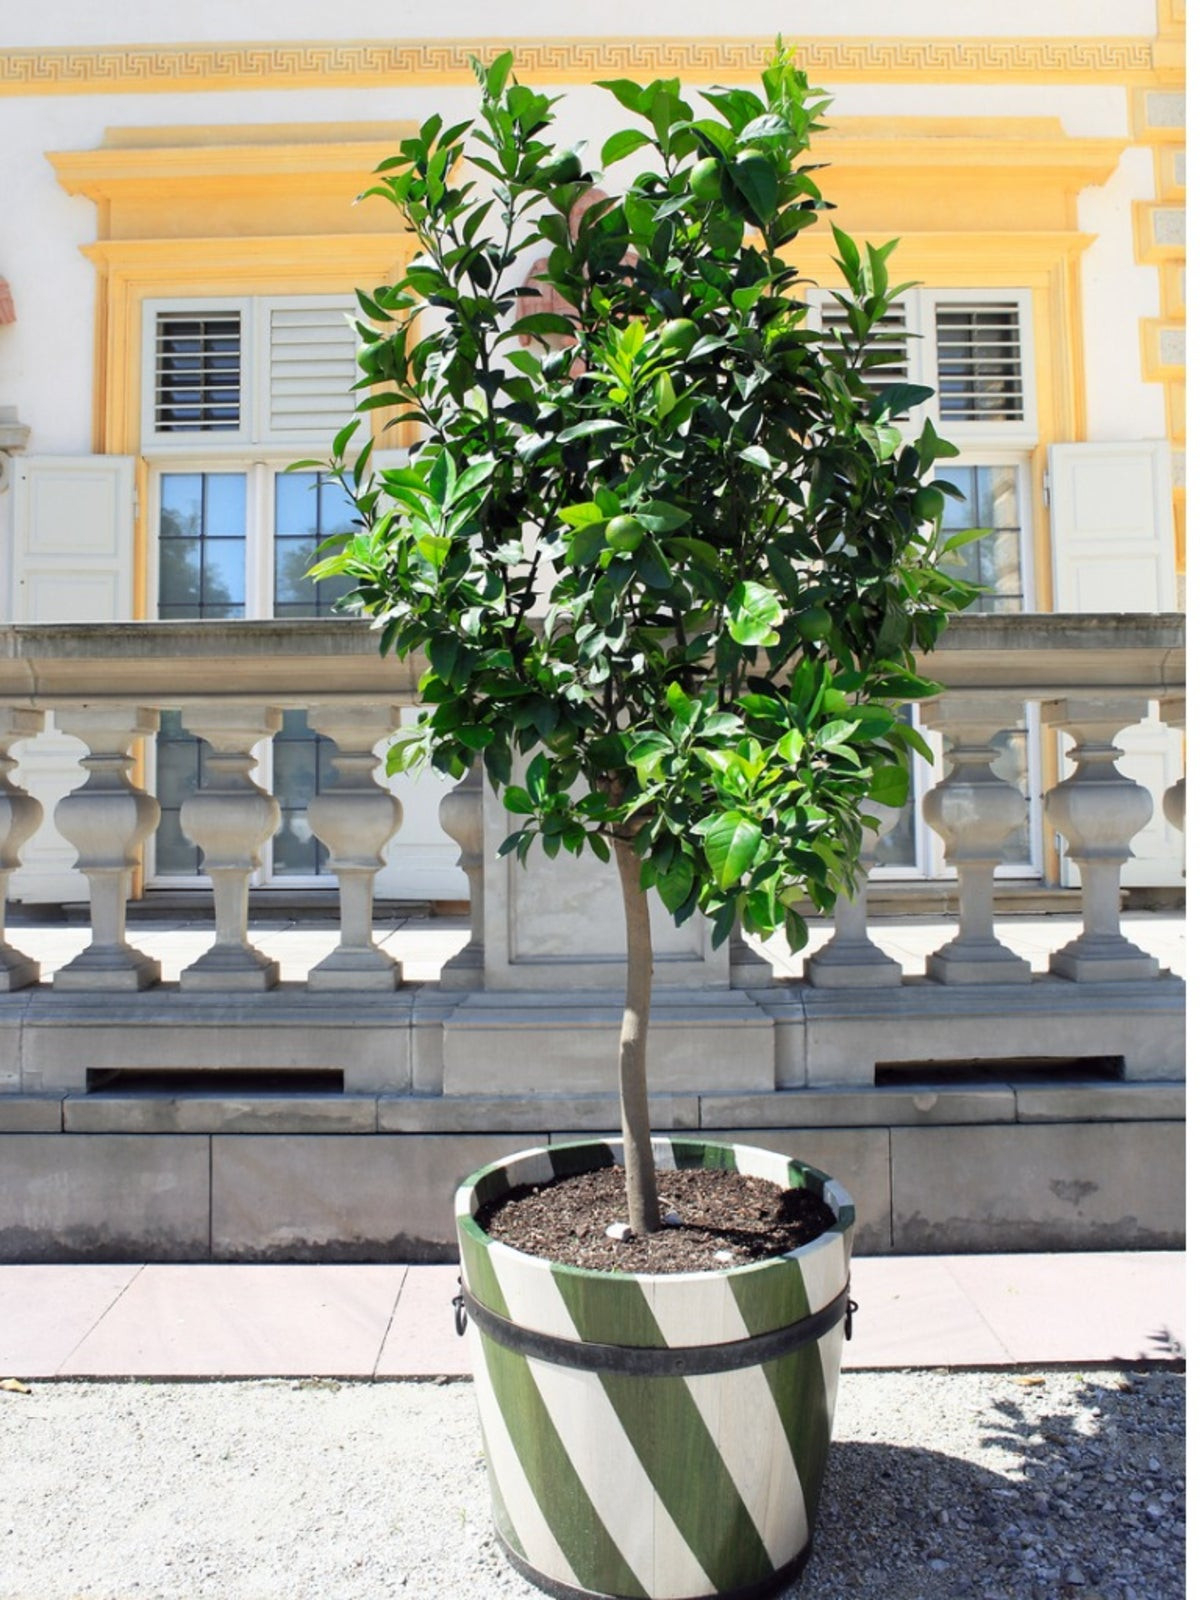 Growing Lime Trees In Containers – How To Care For Lime Trees In A Pot